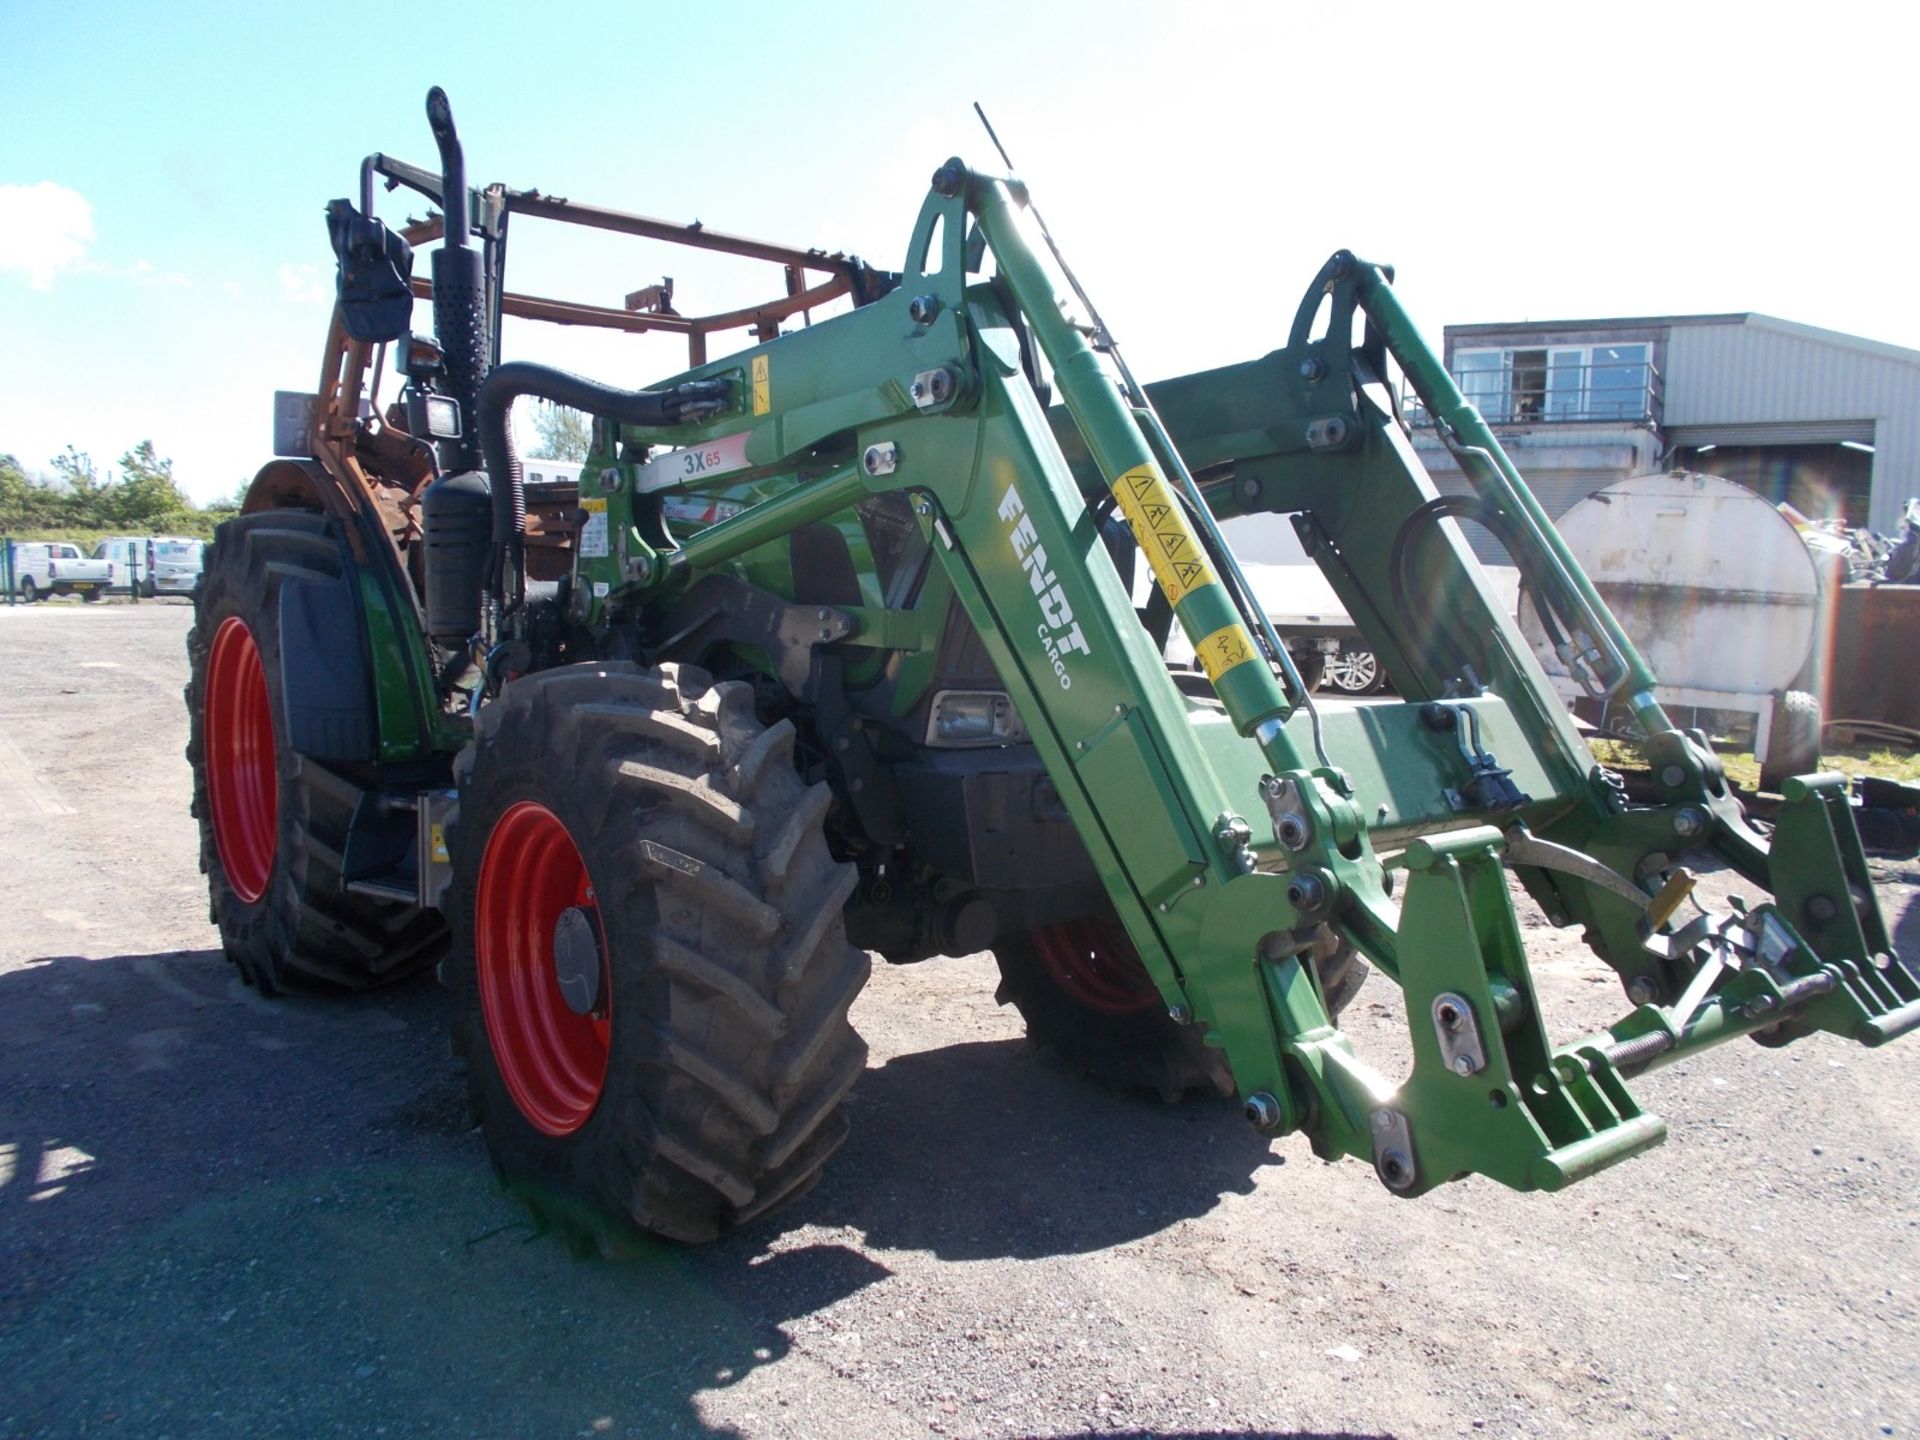 2020 FENDT 211 VARIO AGRICULTURAL TRACTOR, 3.3 LITRE 3 CYL DIESEL, FIRE DAMAGE TO CAB AREA *PLUS VAT - Image 4 of 13